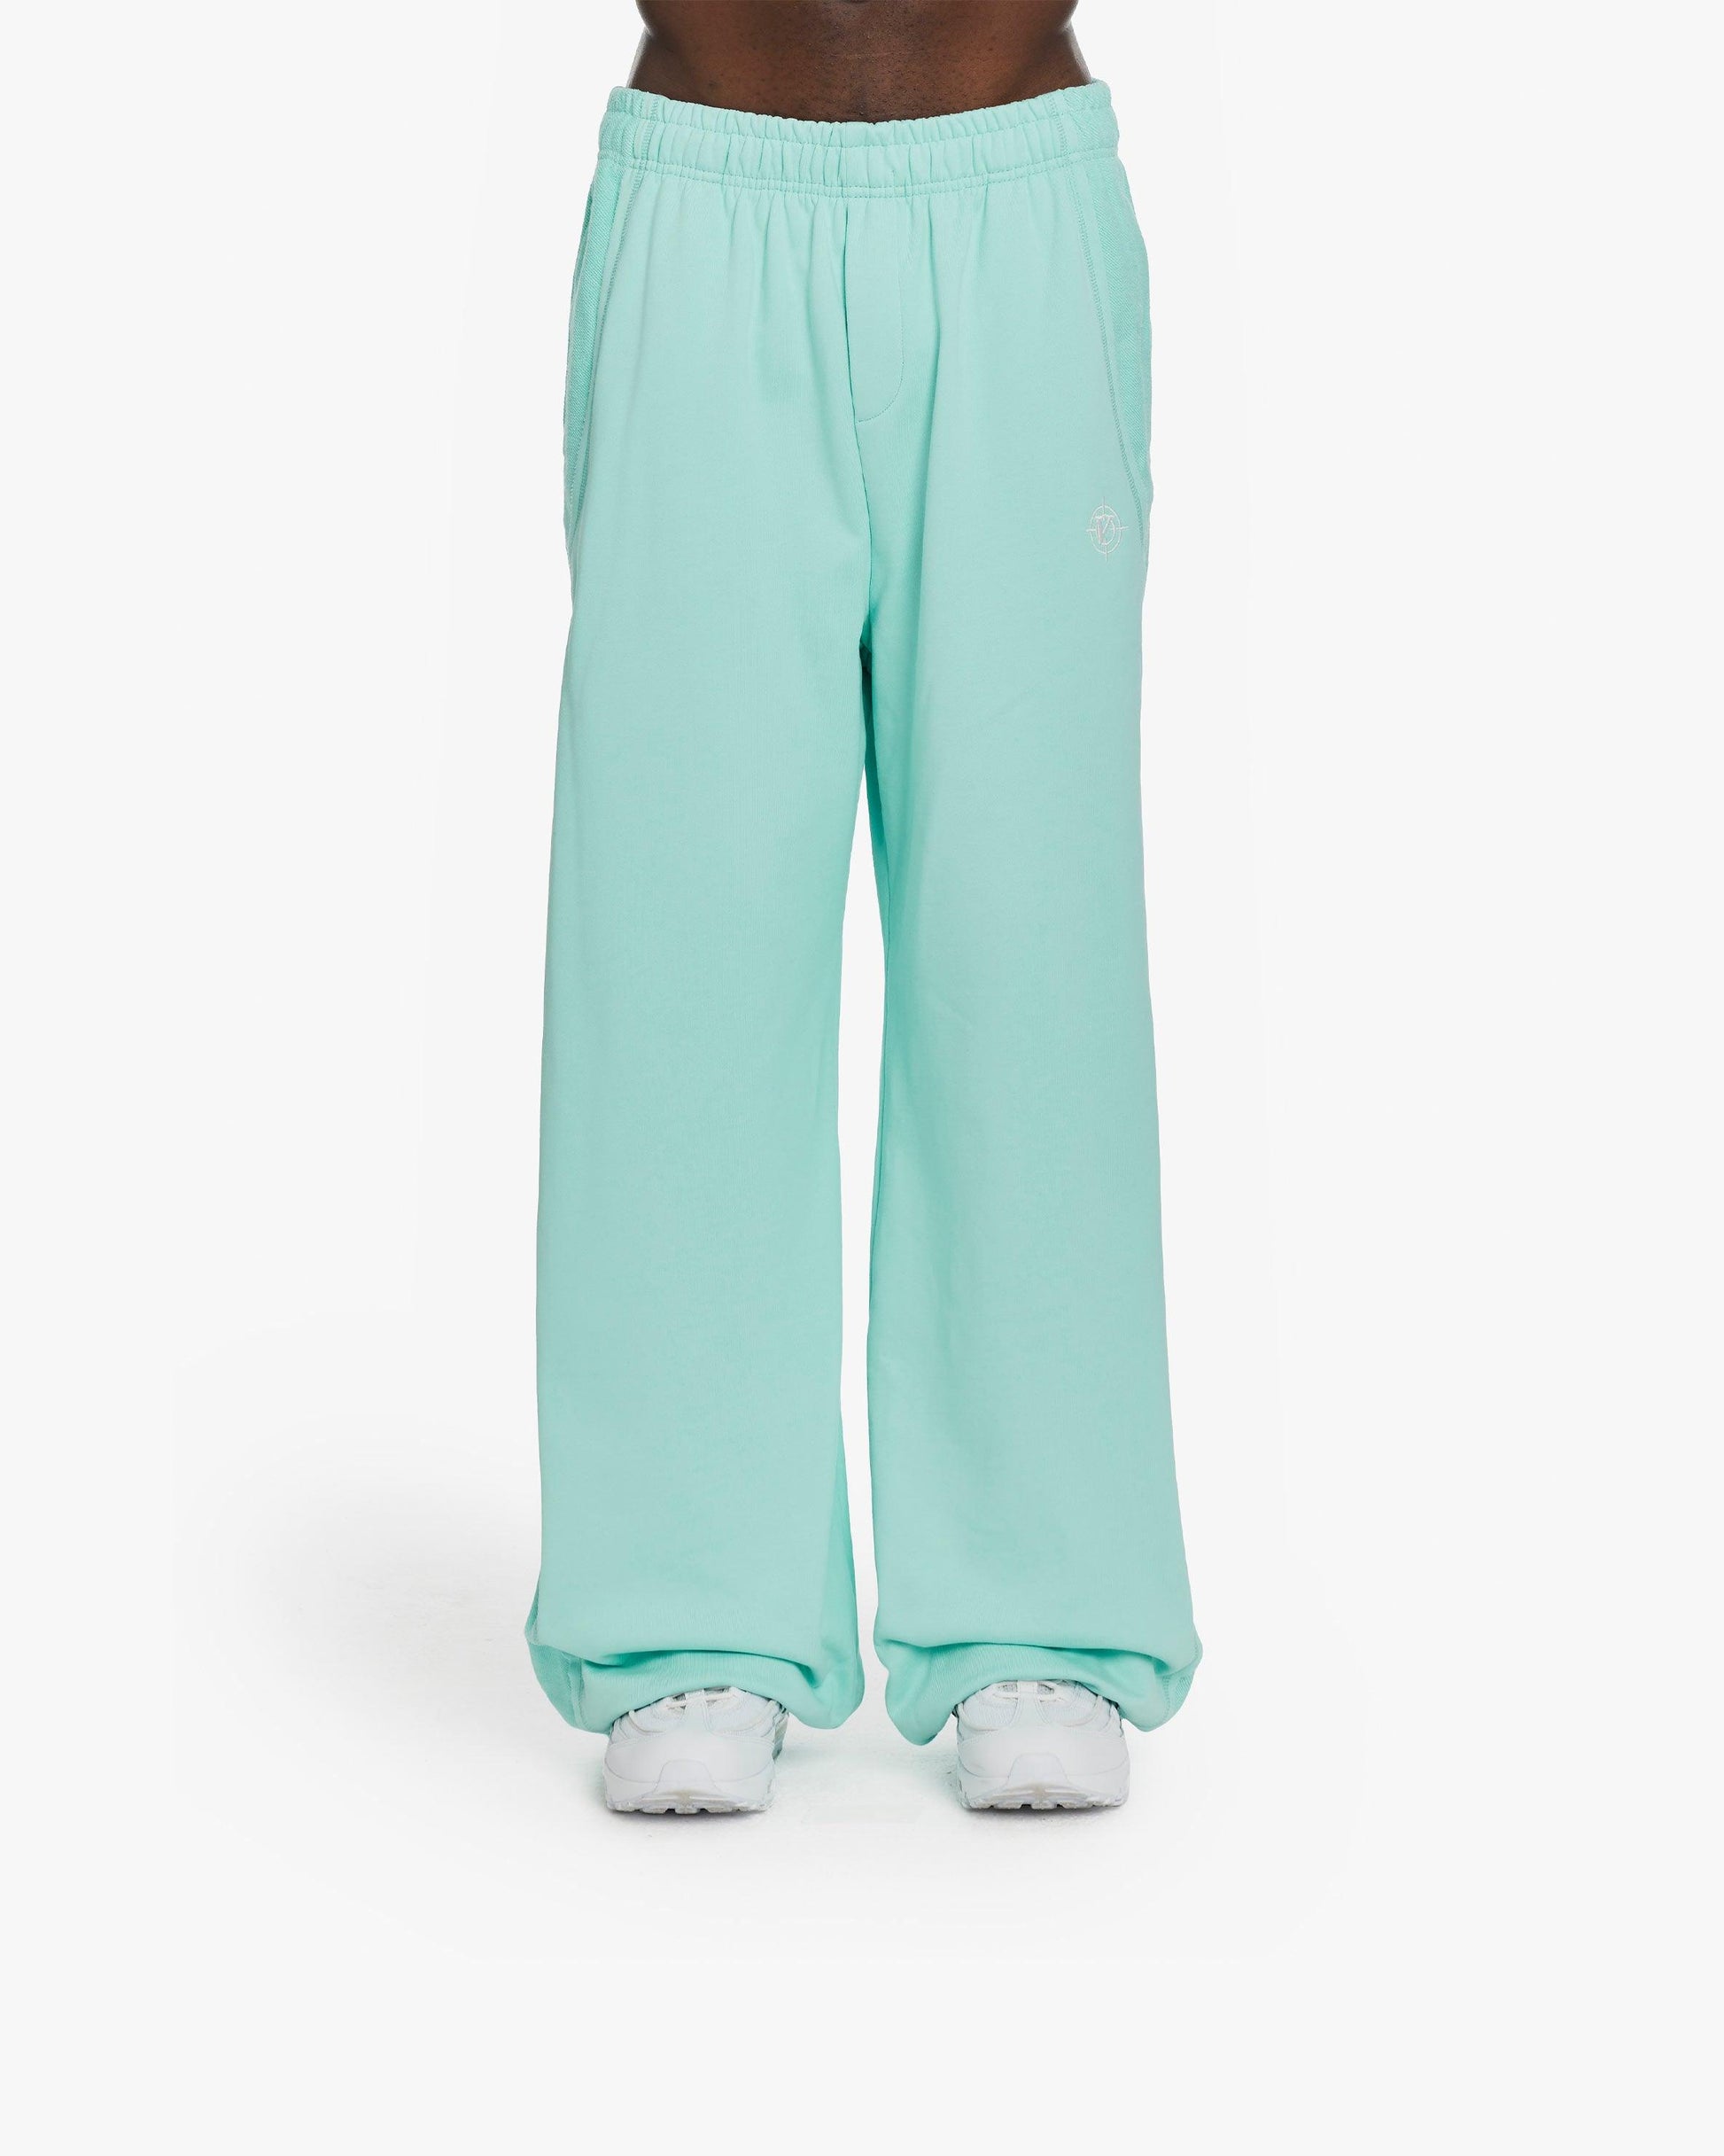 INSIDE OUT JOGGER TURQUOISE - VICINITY